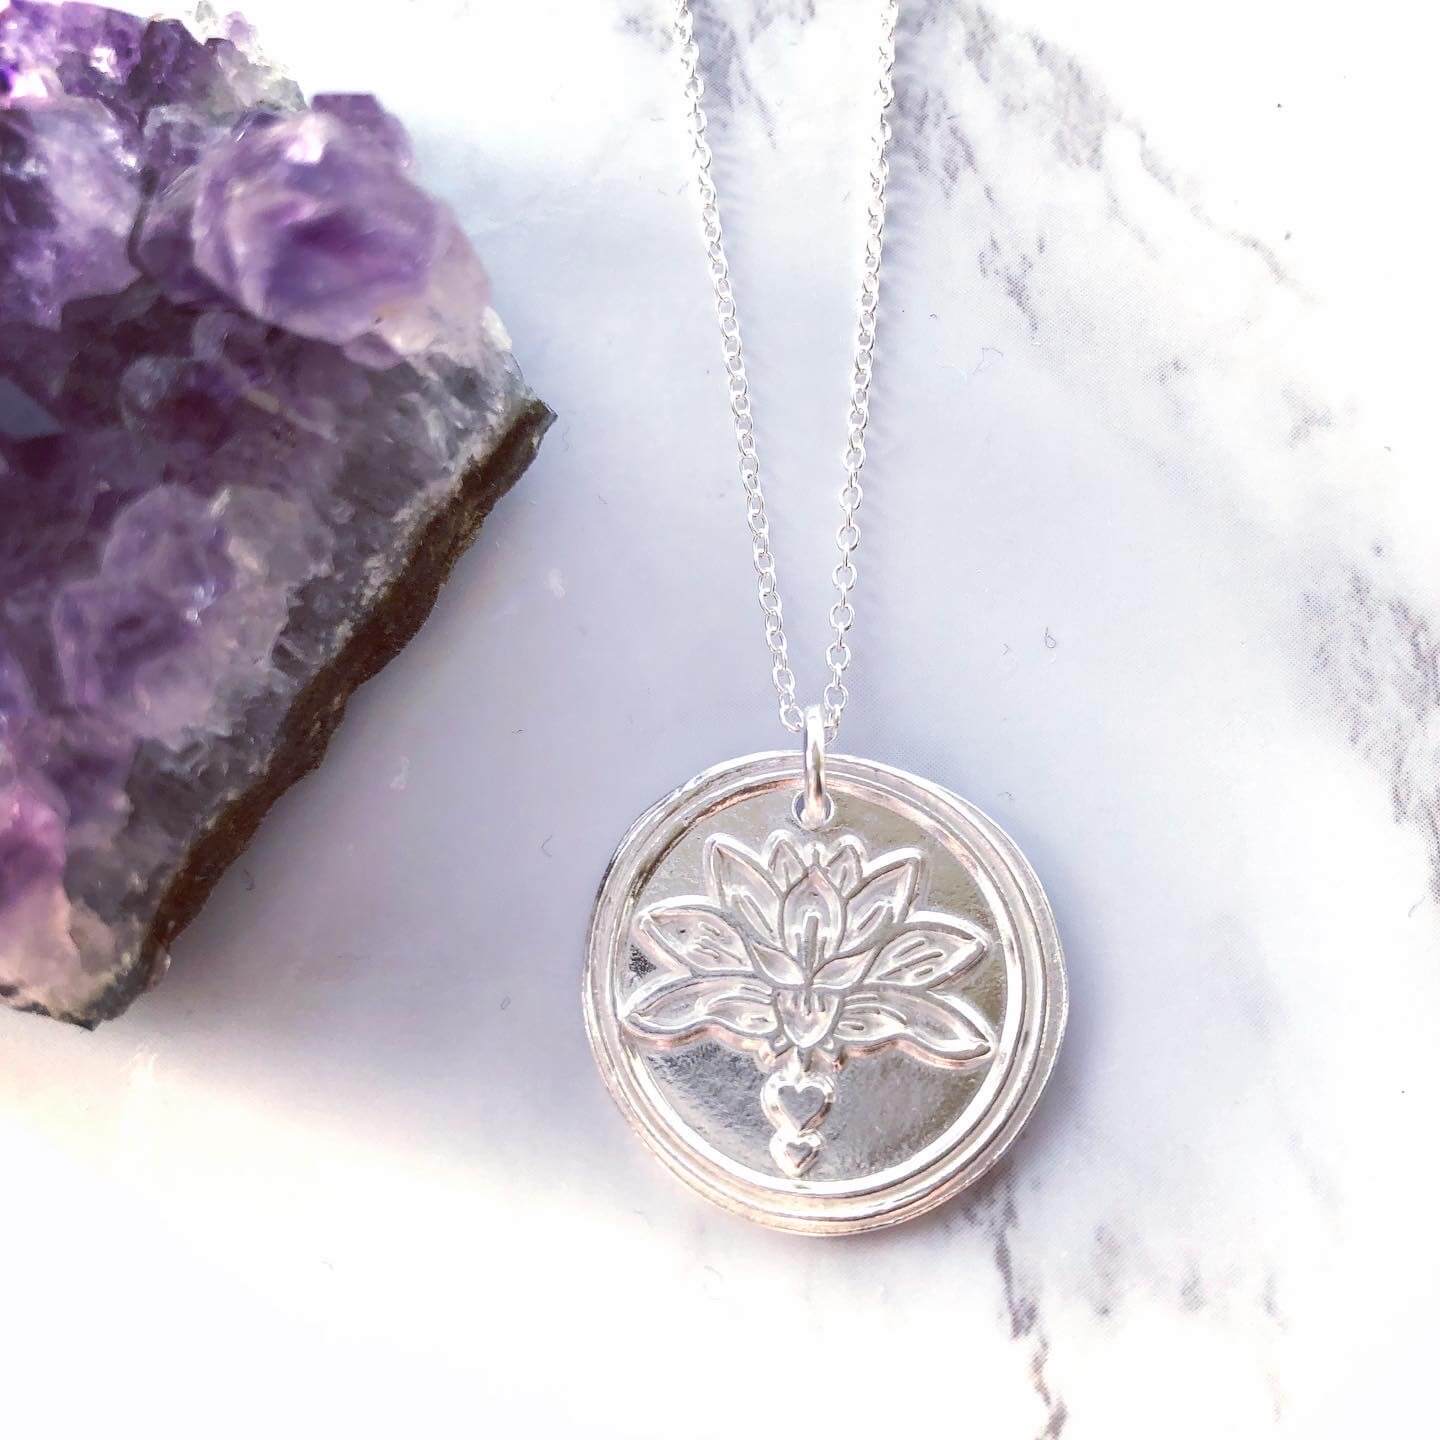 Silver lotus flower pendant - unusual jewellery gifts for her